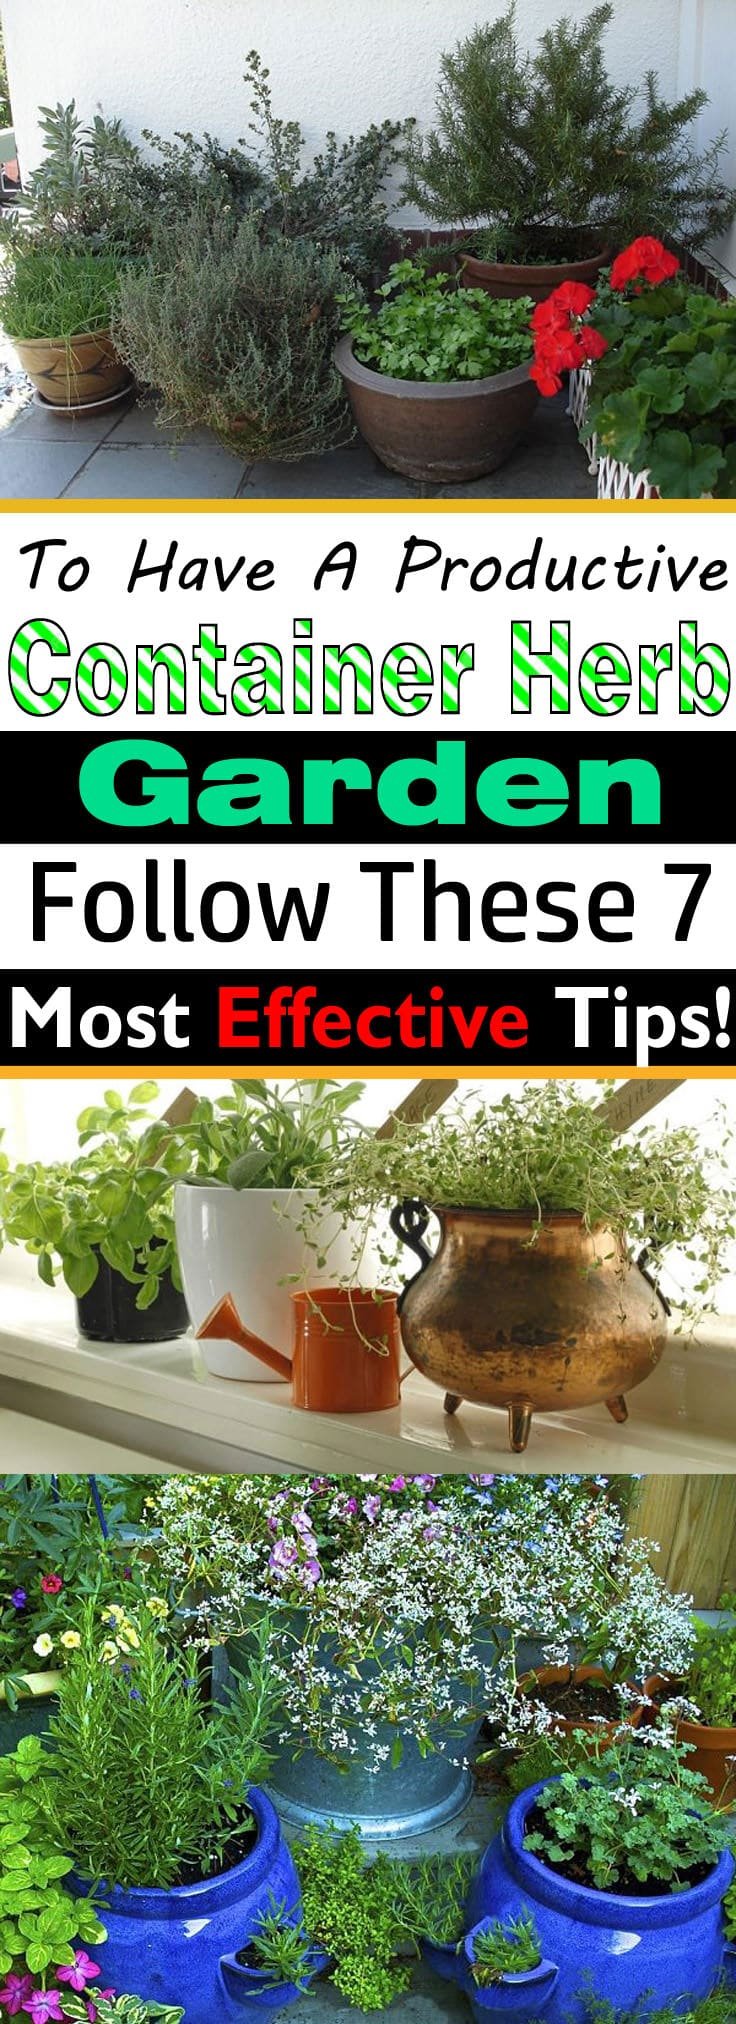 If you're growing herbs in pots, must follow these herb gardening tips!